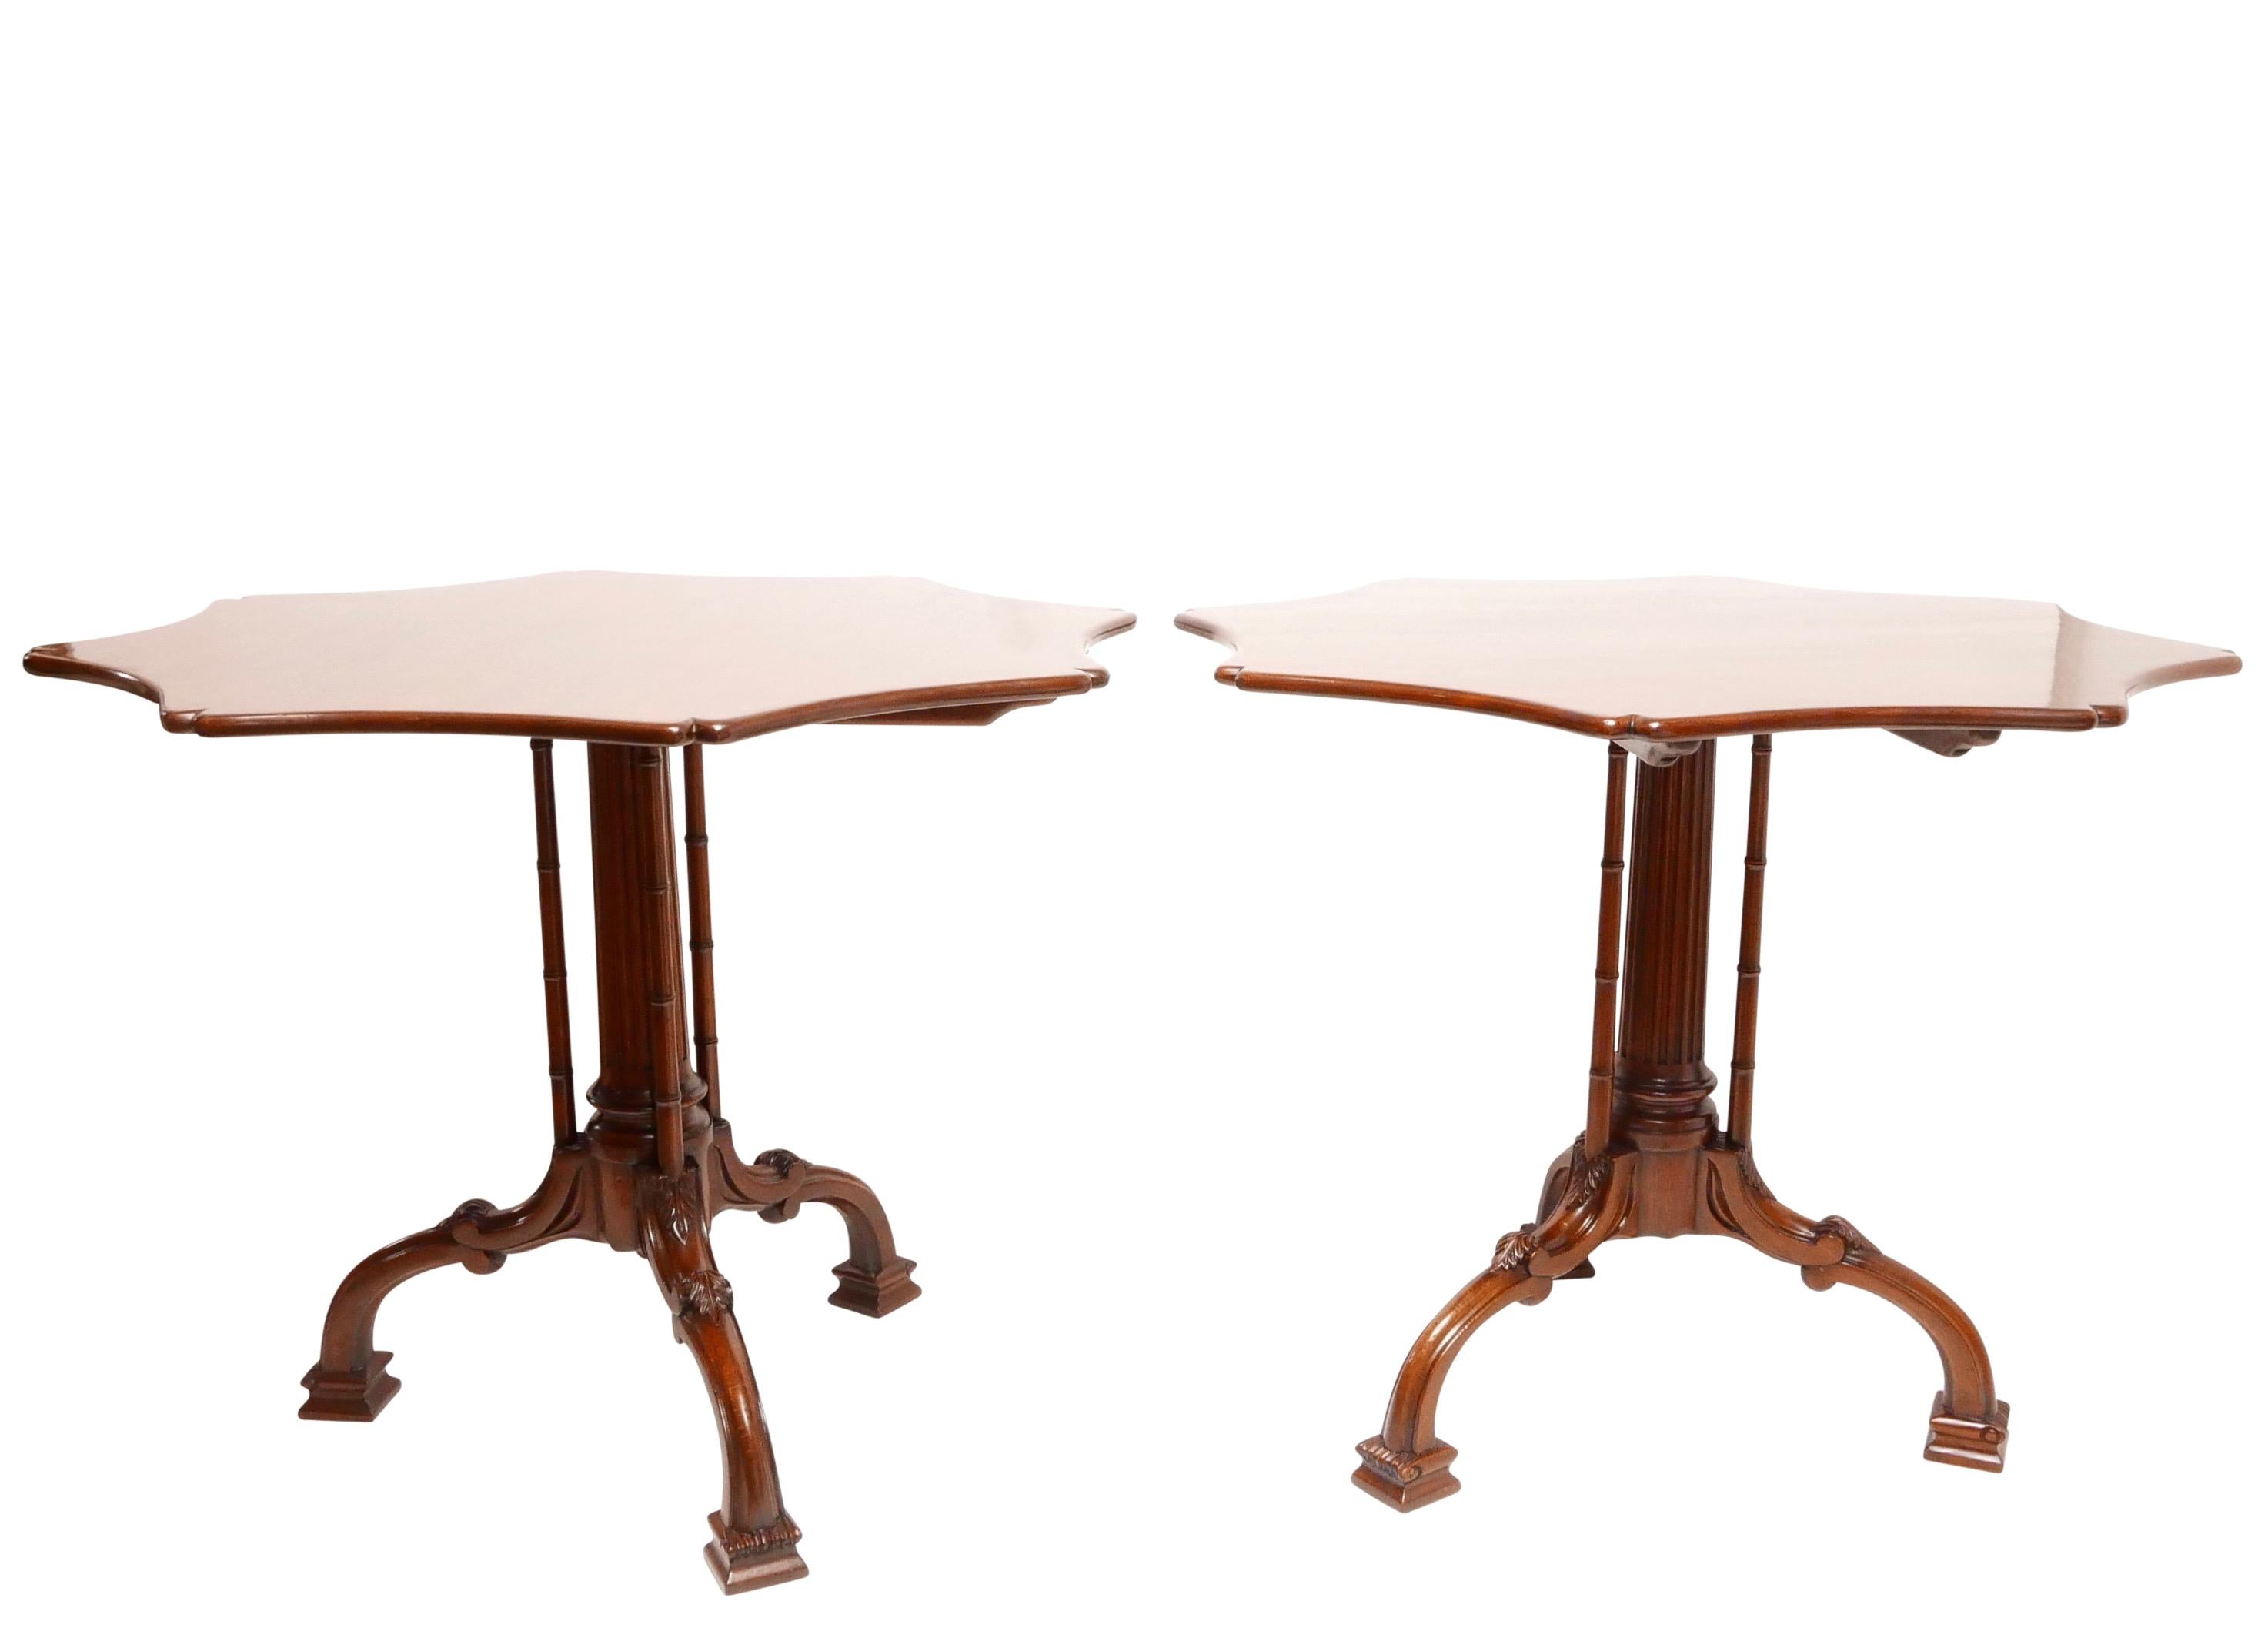 A pair of exquisitely executed Chippendale style mahogany tilt-top tables by Burton Ching of San Francisco, Custom Furniture Maker,
circa 1990.
  